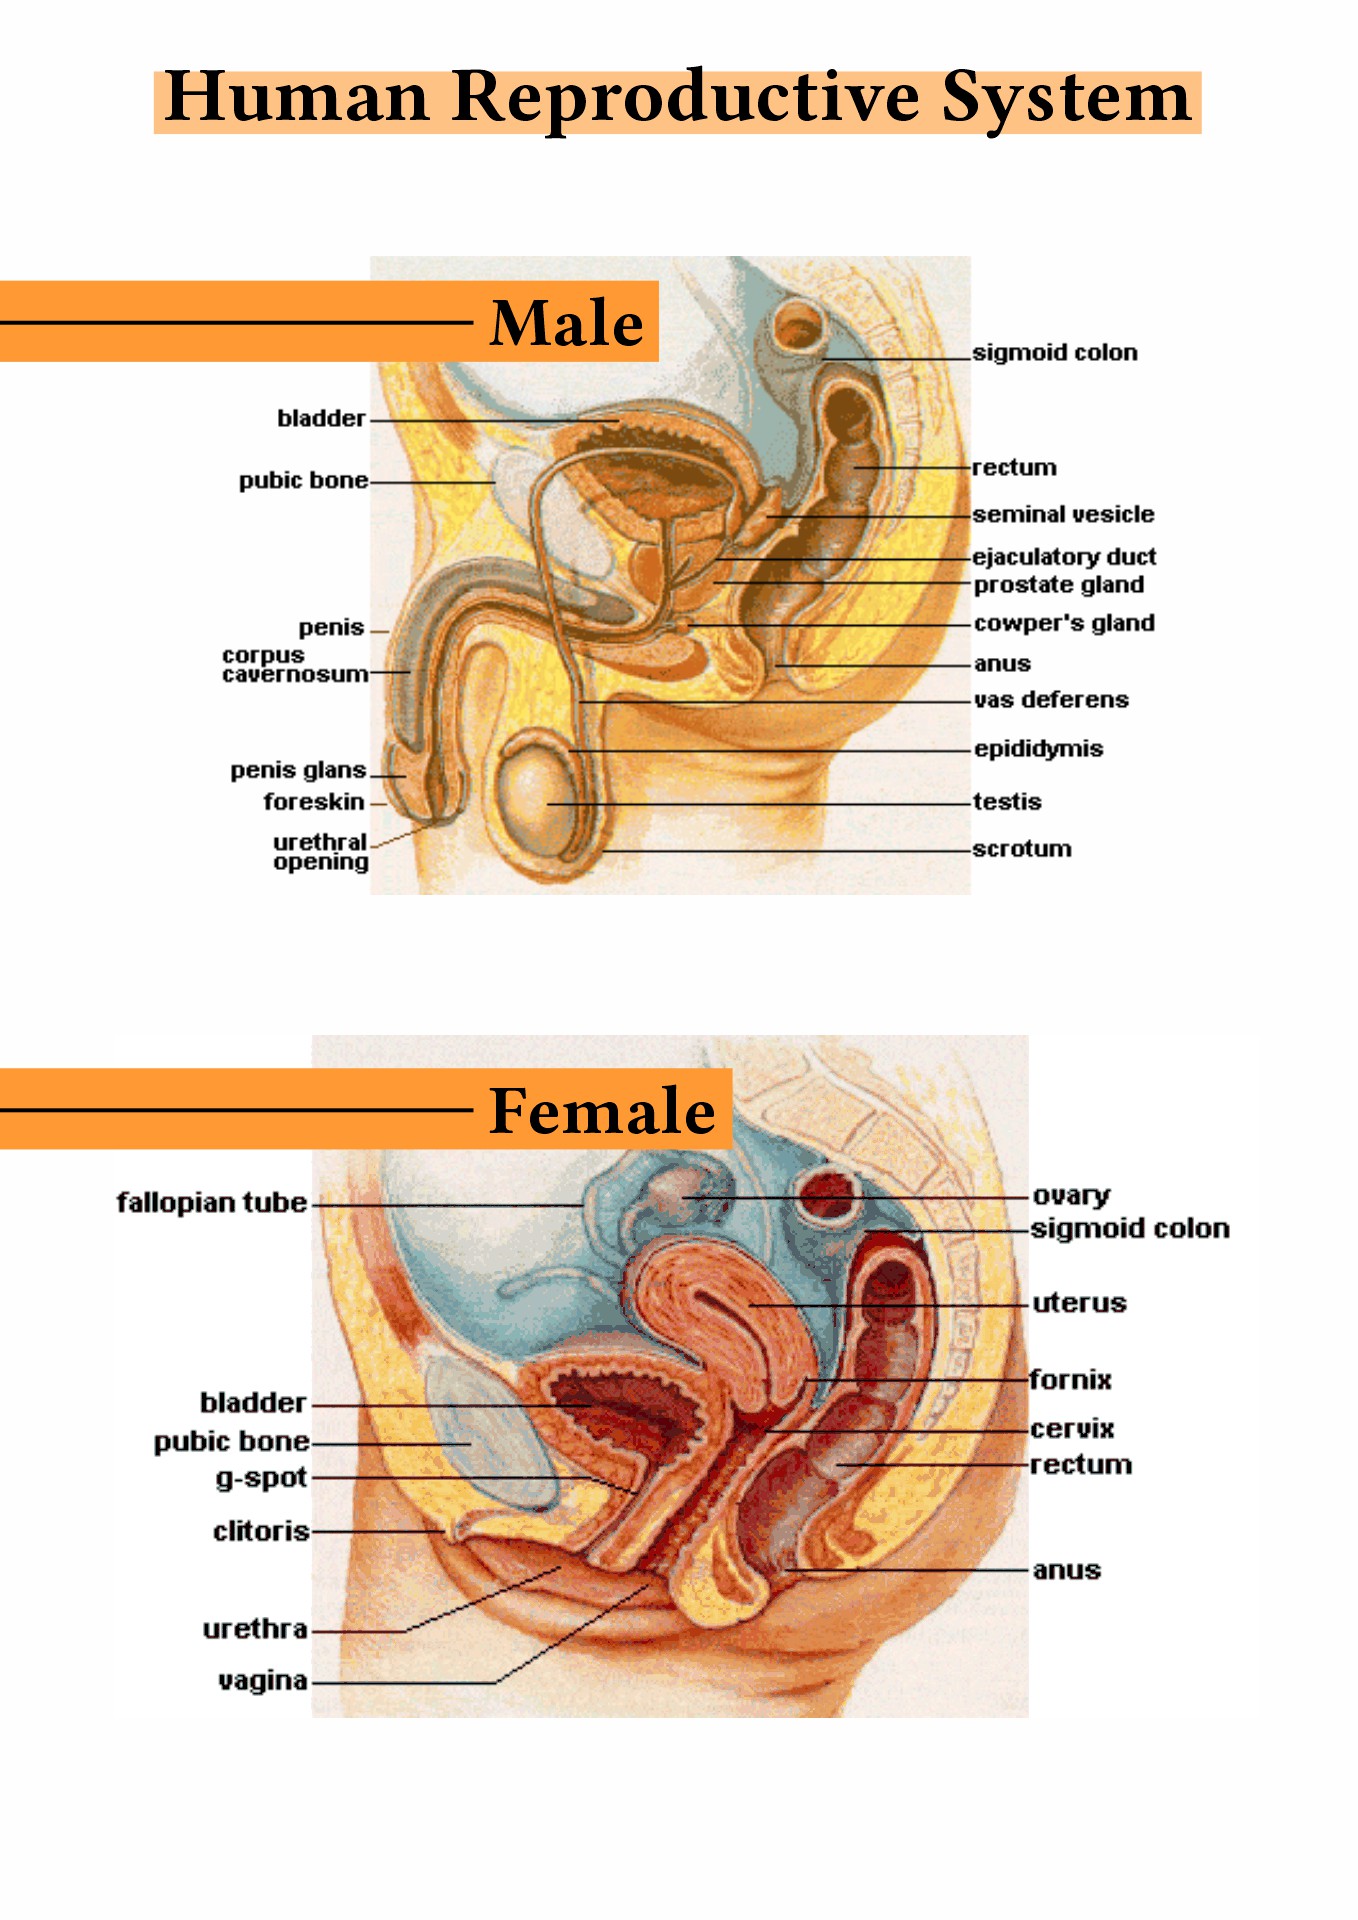 Male and Female Reproductive System Functions Image